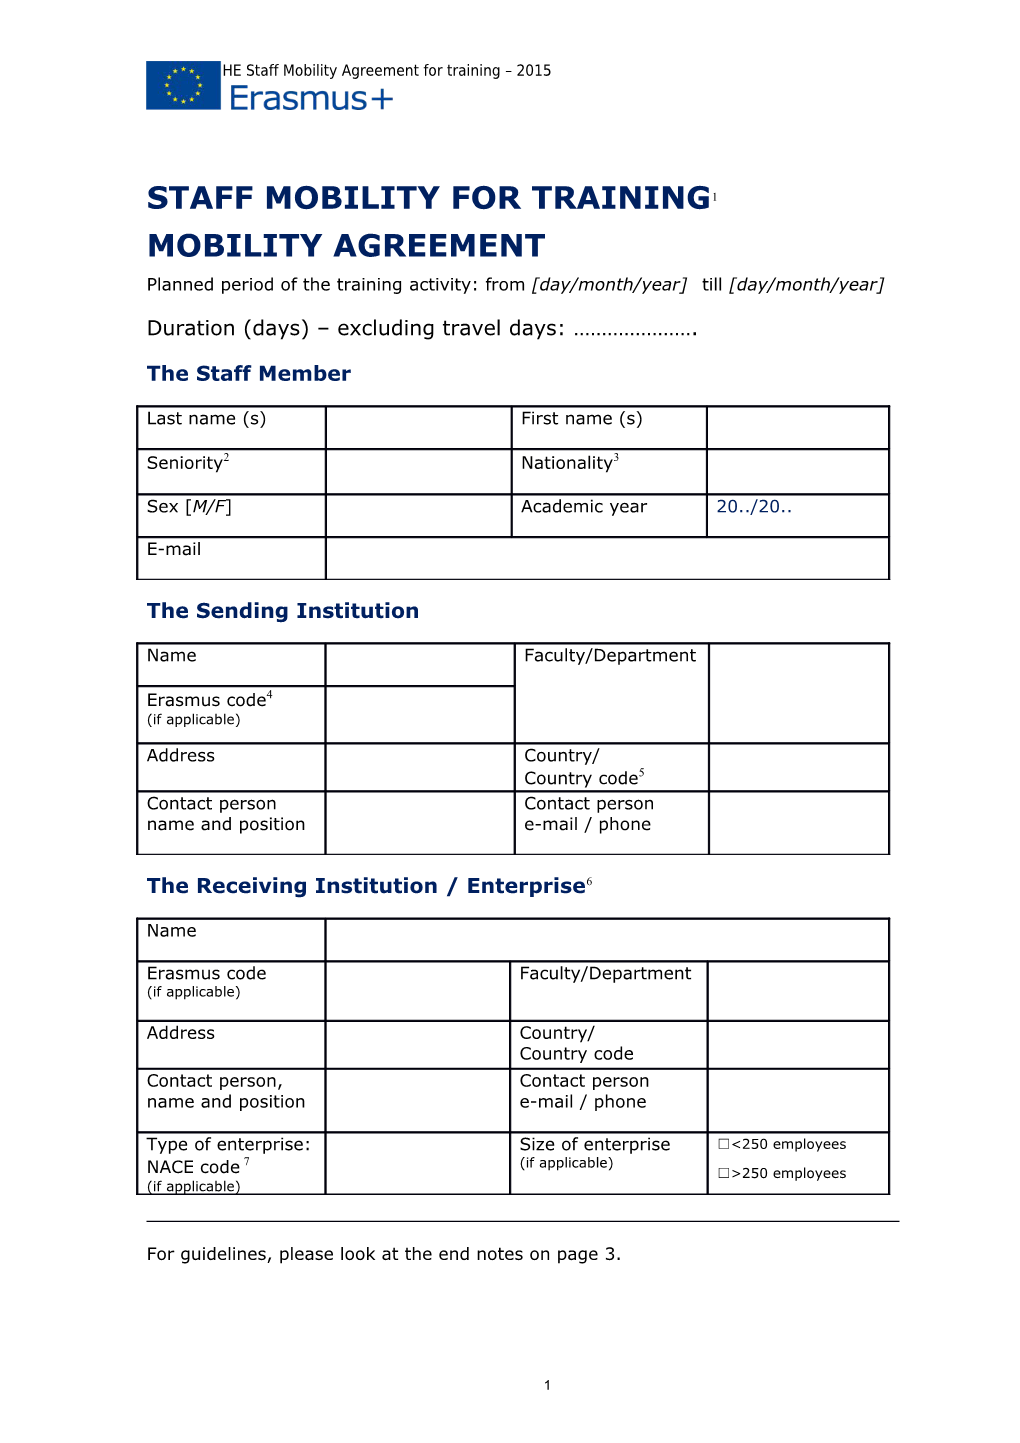 Erasmus+ HE Staff Mobility Agreement for Training 2015